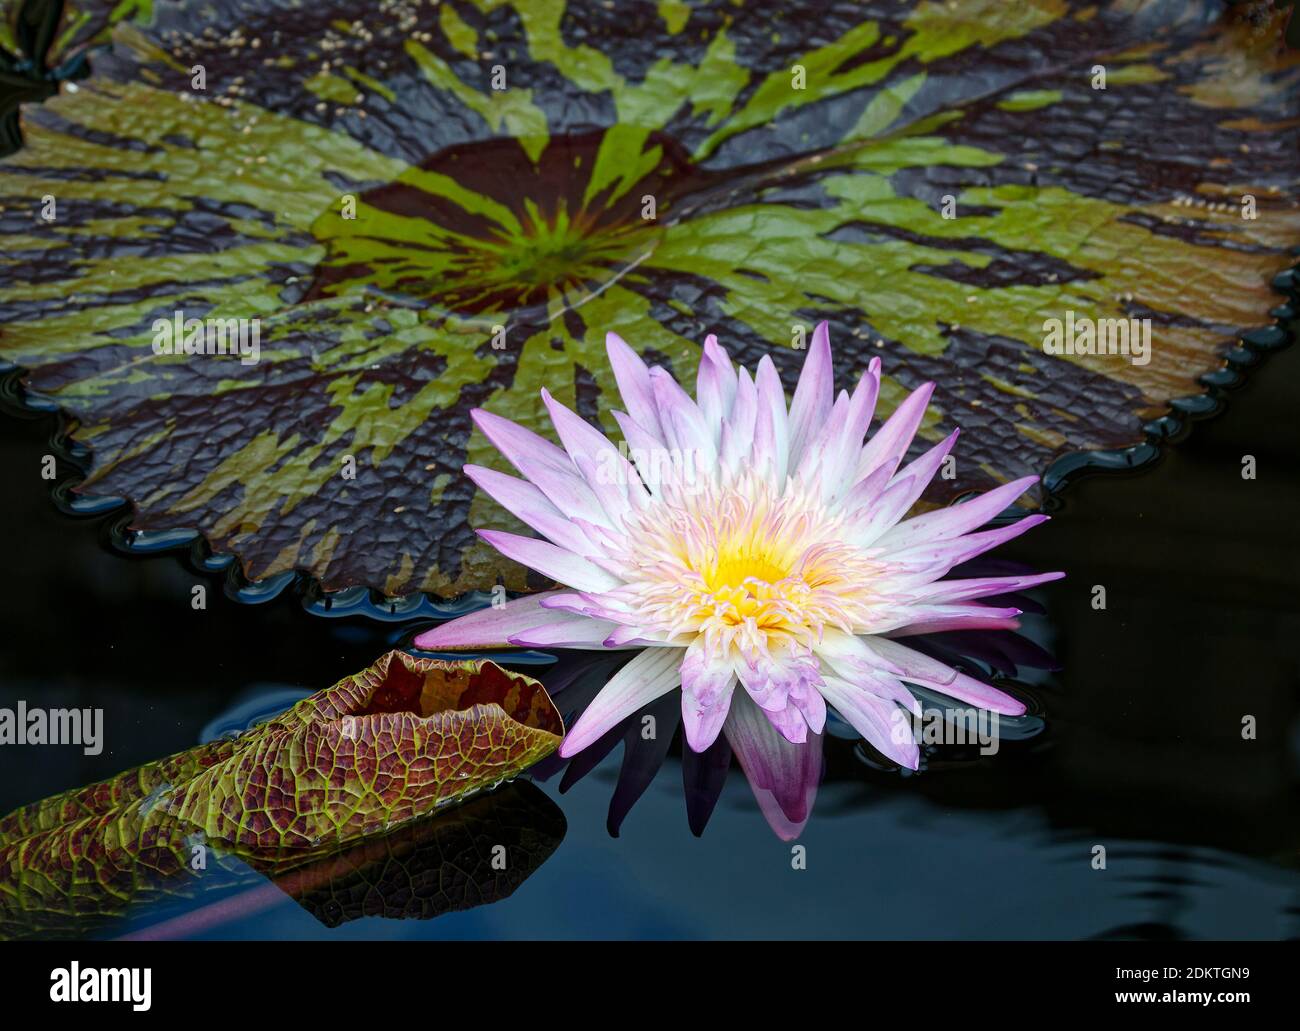 Waterlily, Nymphaea, herbaceous, tropical, day-flowering, white, lavender tips, yellow center, large bi-color leaves, Pennsylvania; Stock Photo